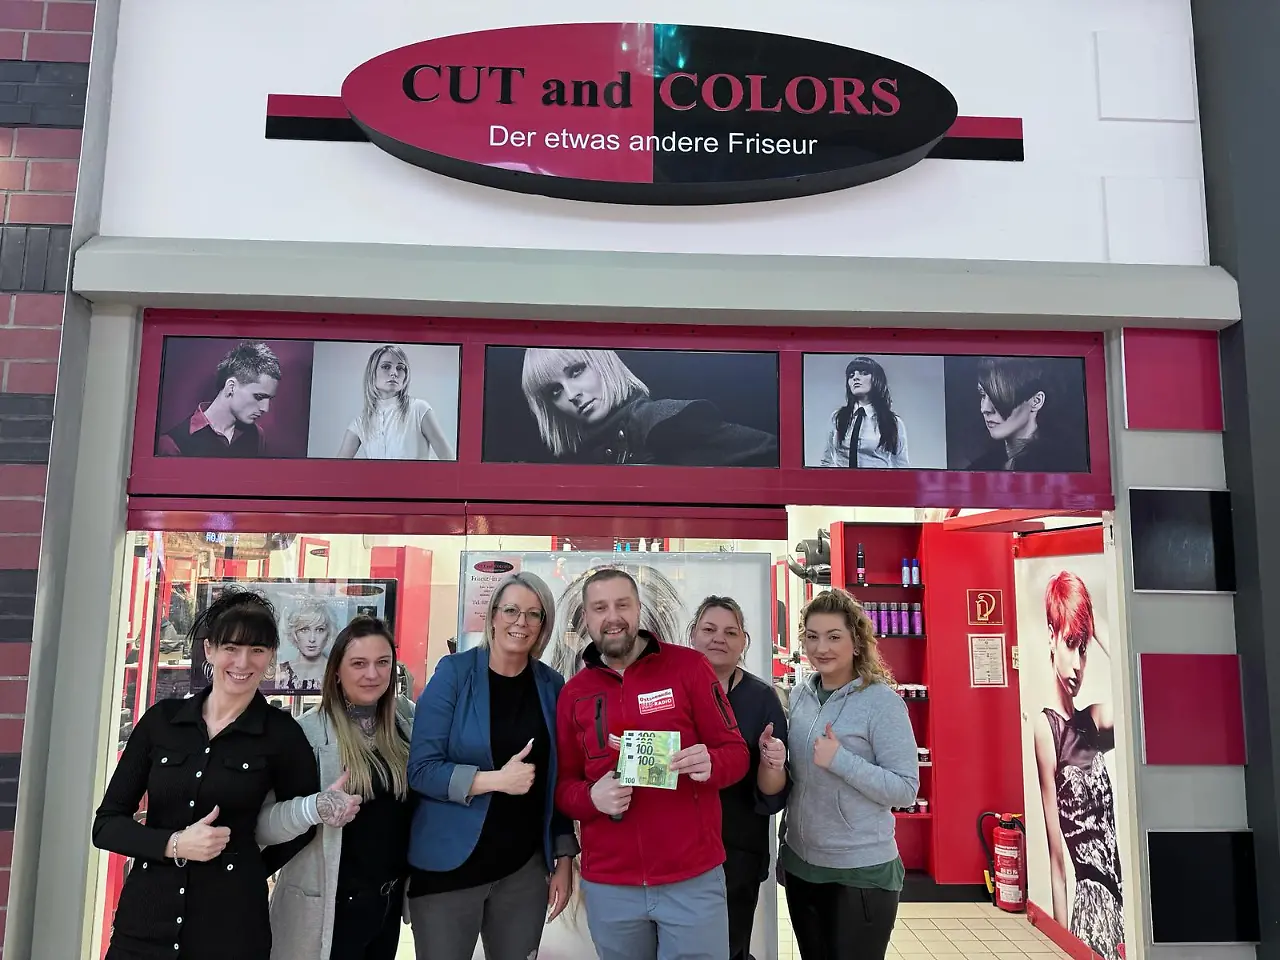 Kristin vom Friseur "Cut and Colors" in Greifswald